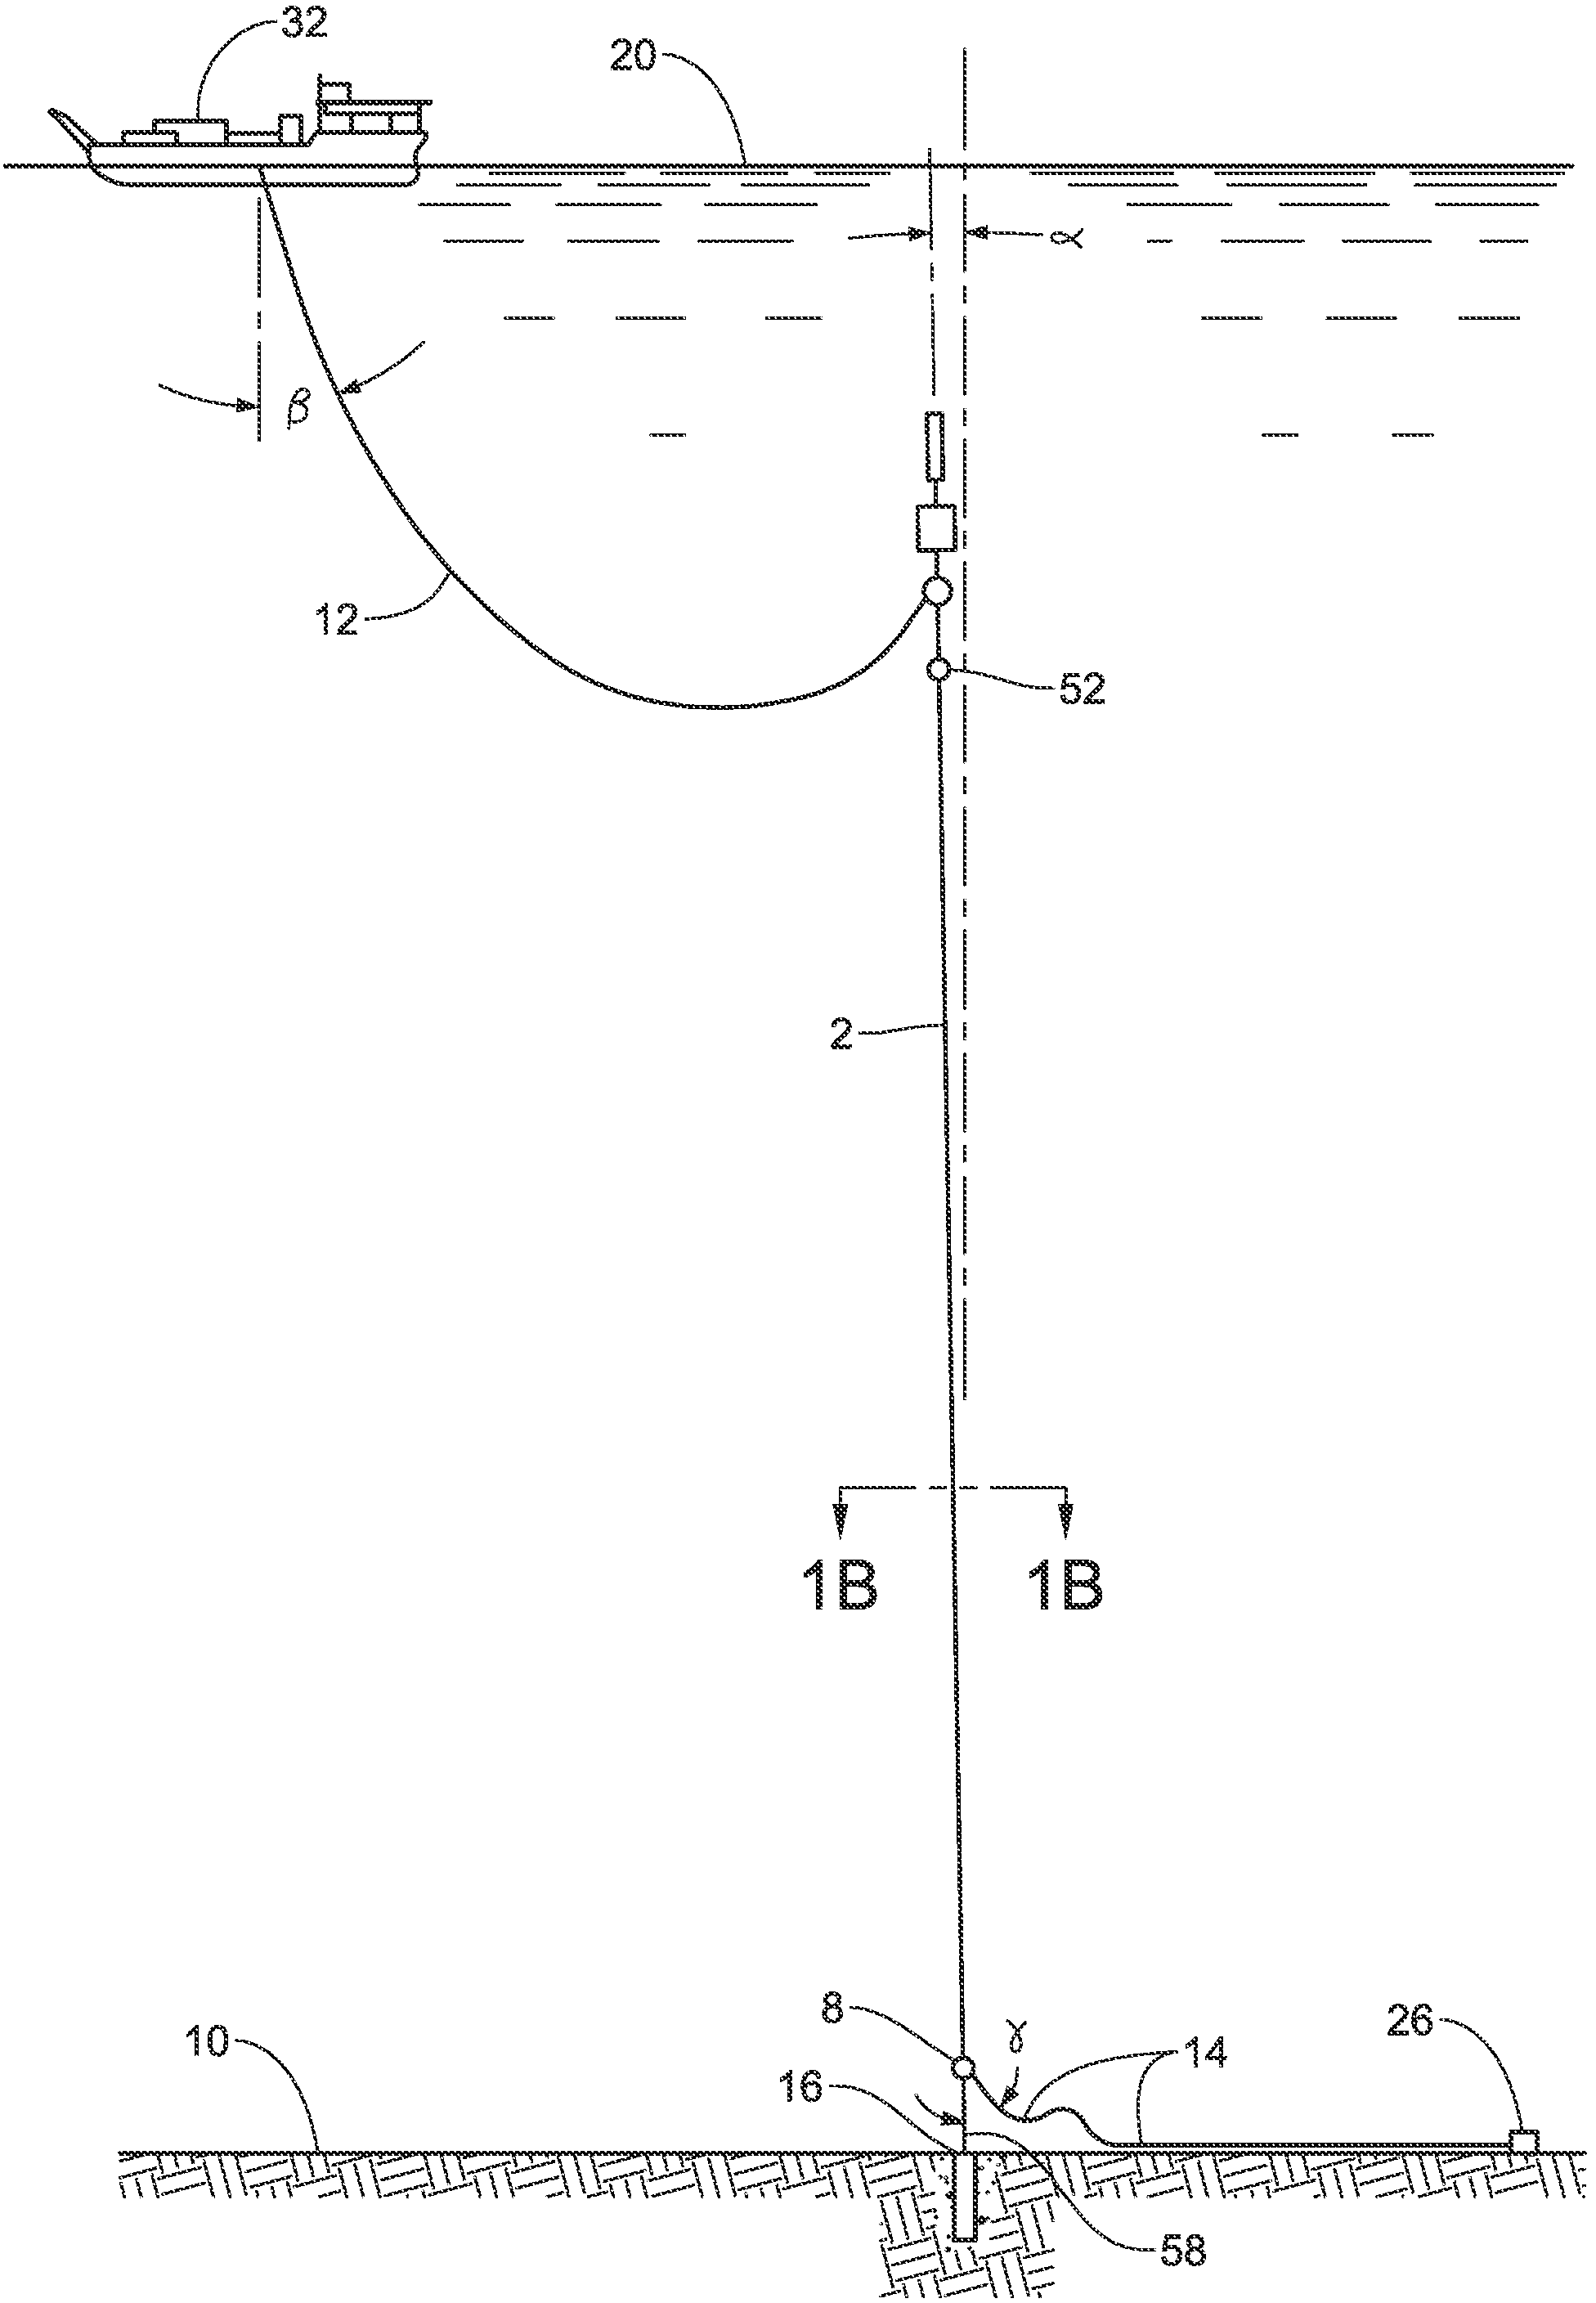 Marine subsea free-standing riser systems and methods